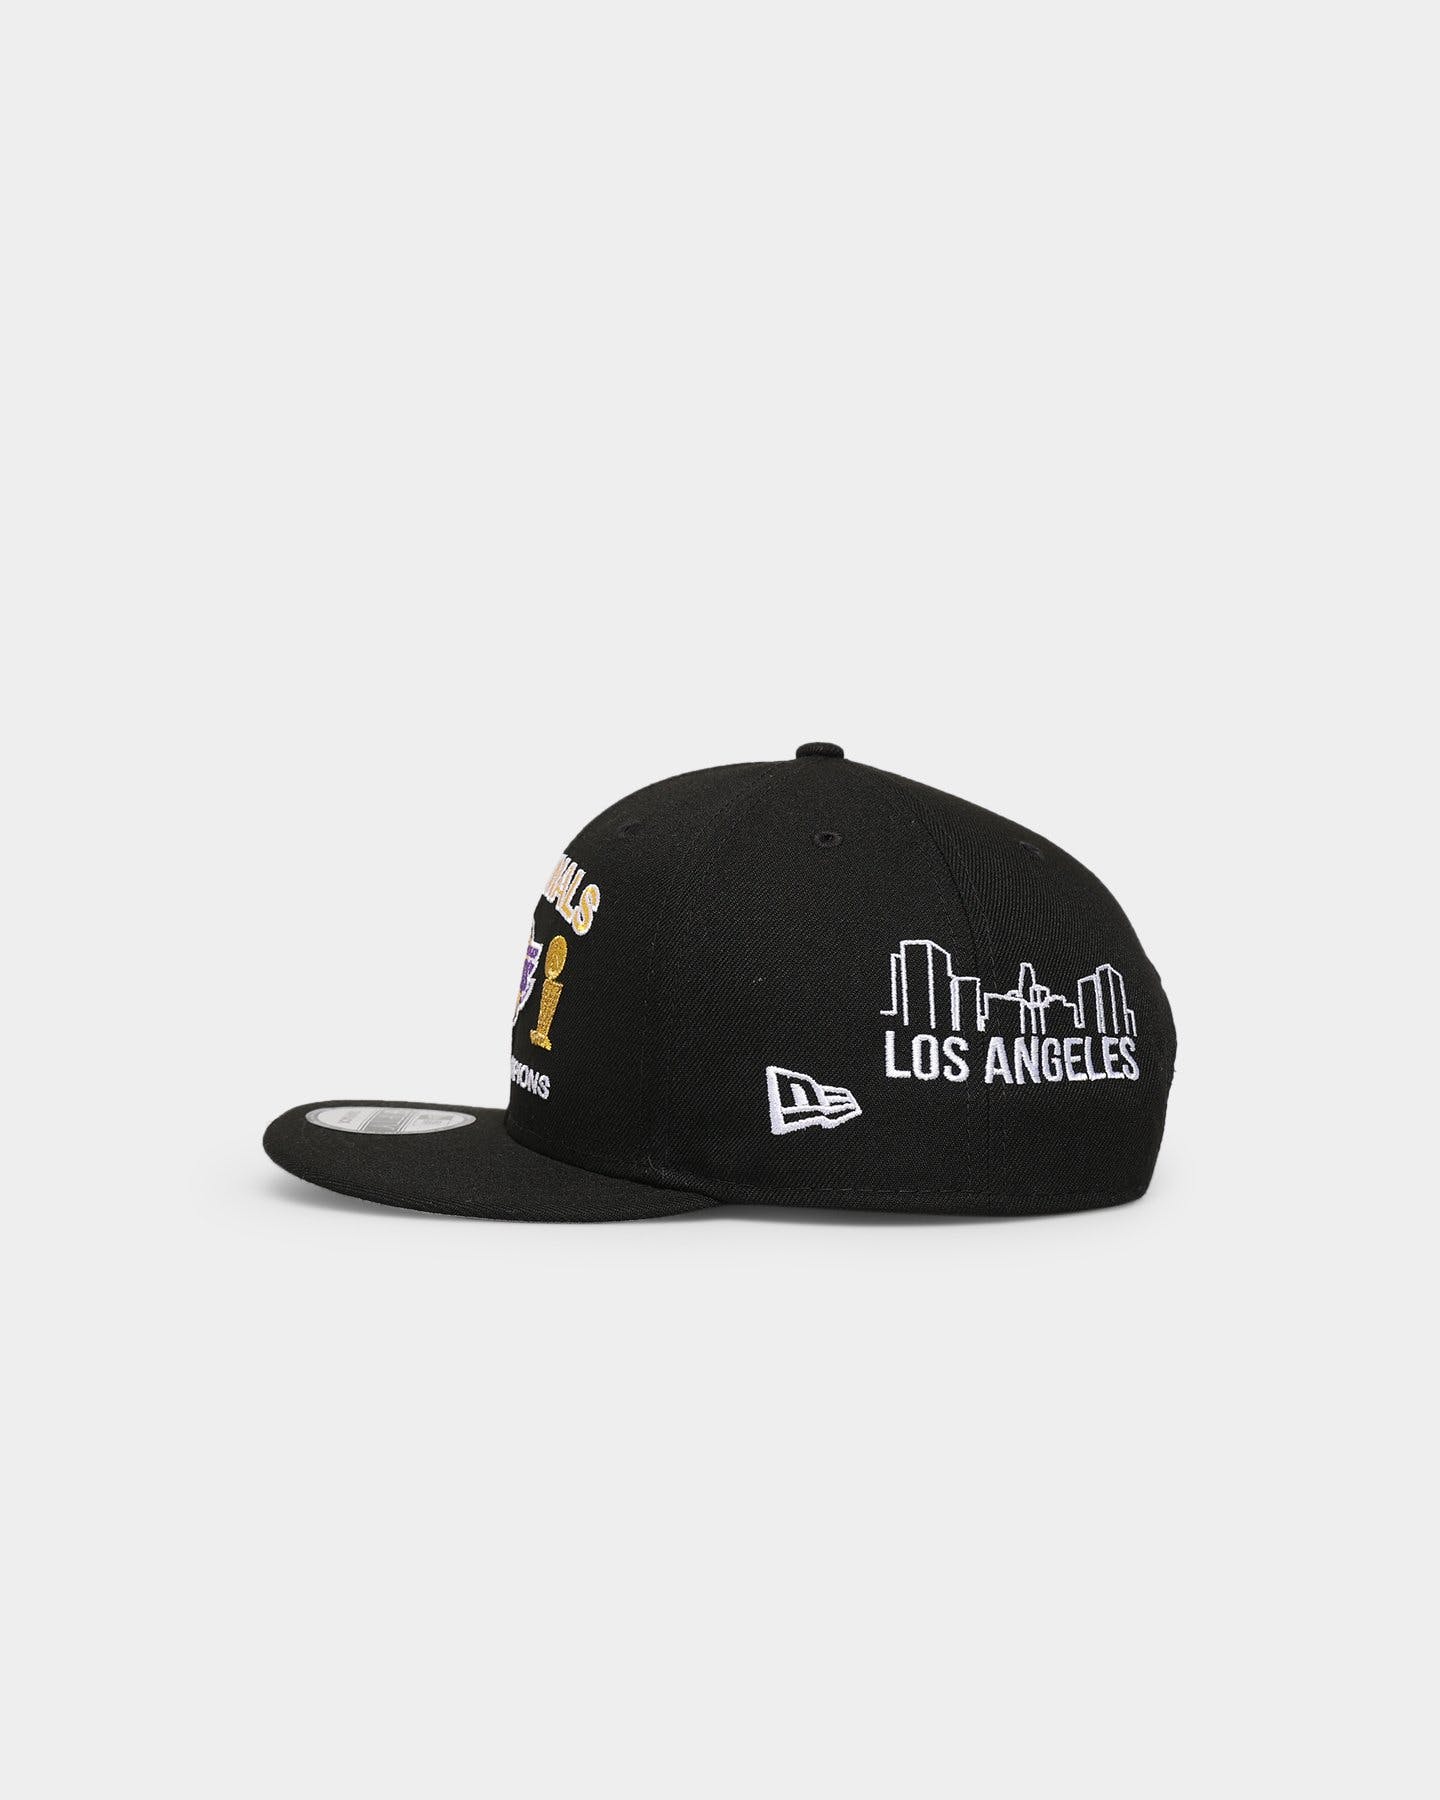 LOS ANGELES LAKERS FINALS ICON 9FIFTY SNAPBACK